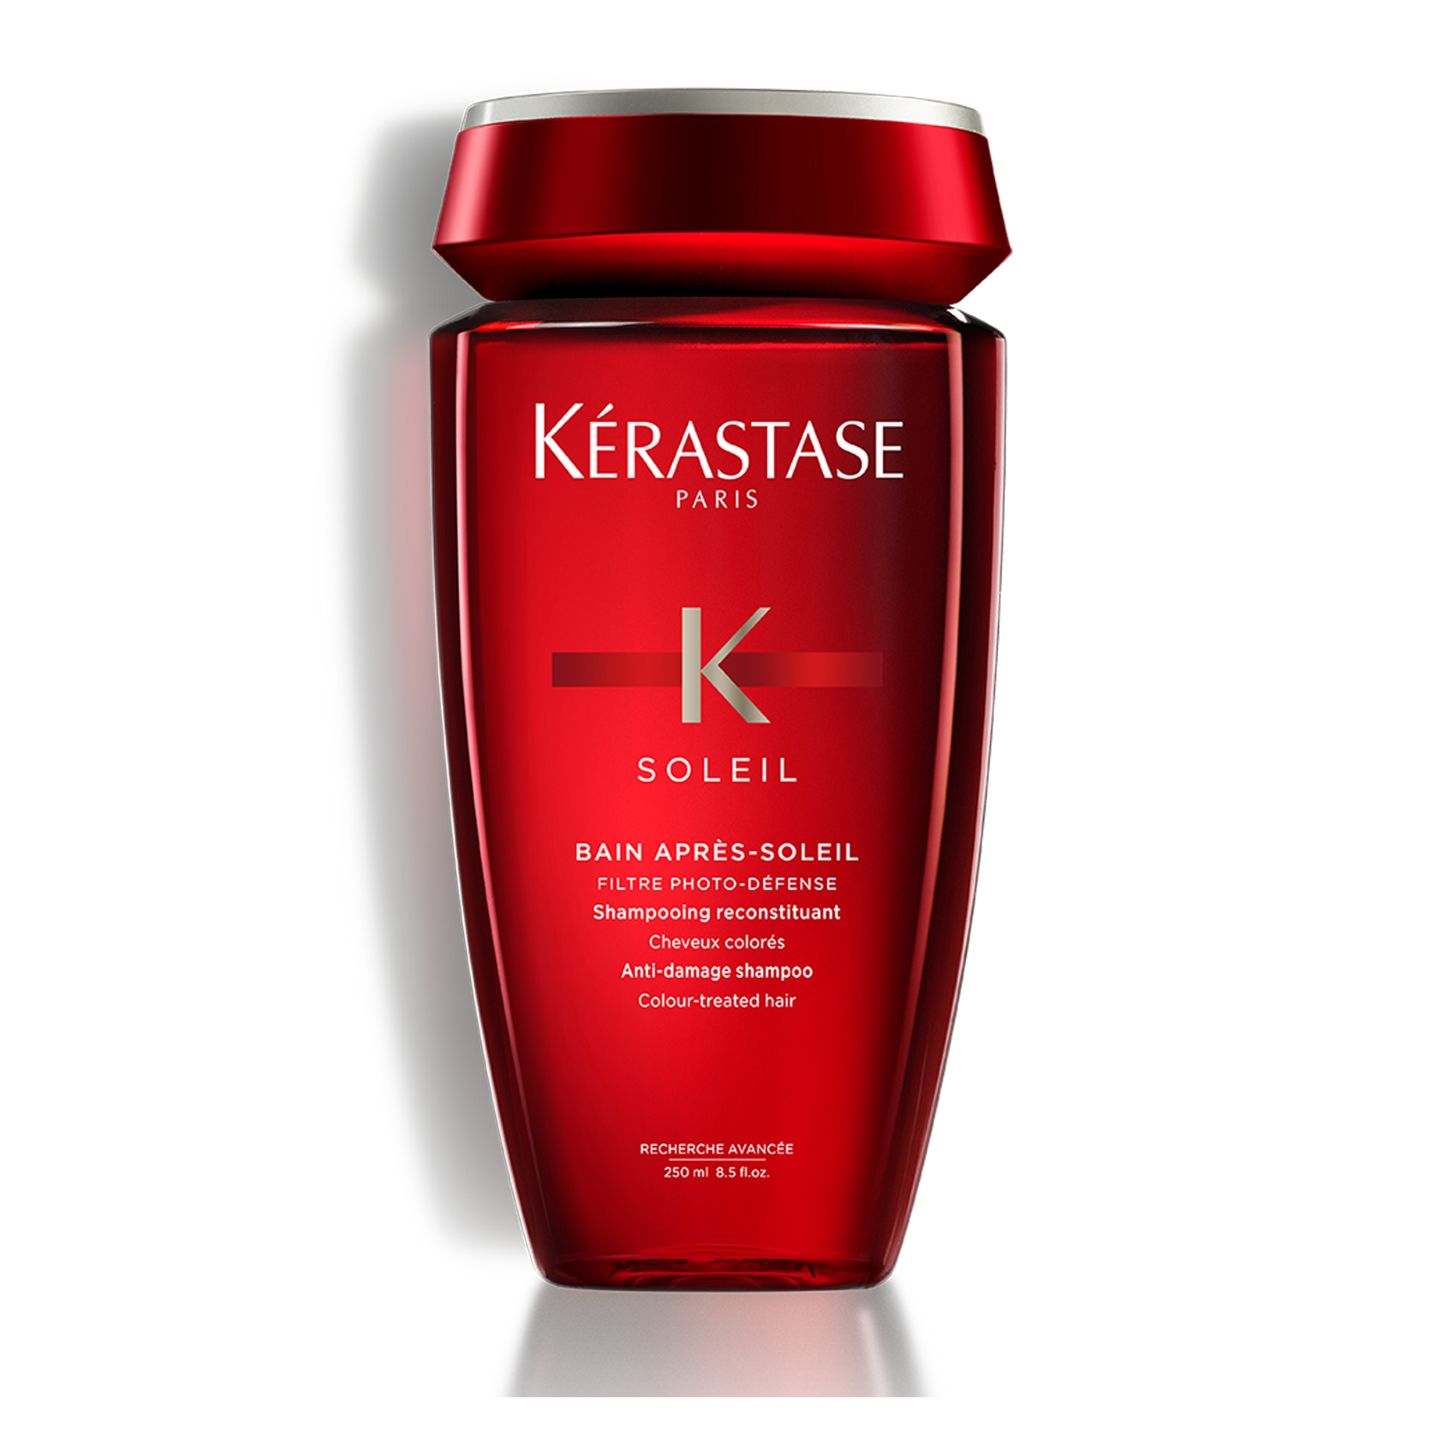 Don’t head for the sun without this iconic UV-protecting shampoo, which will prevent colour fading. Kerastase Soleil Bain Après Soleil Shampoo, $55 for 250ml, kerastase.ca